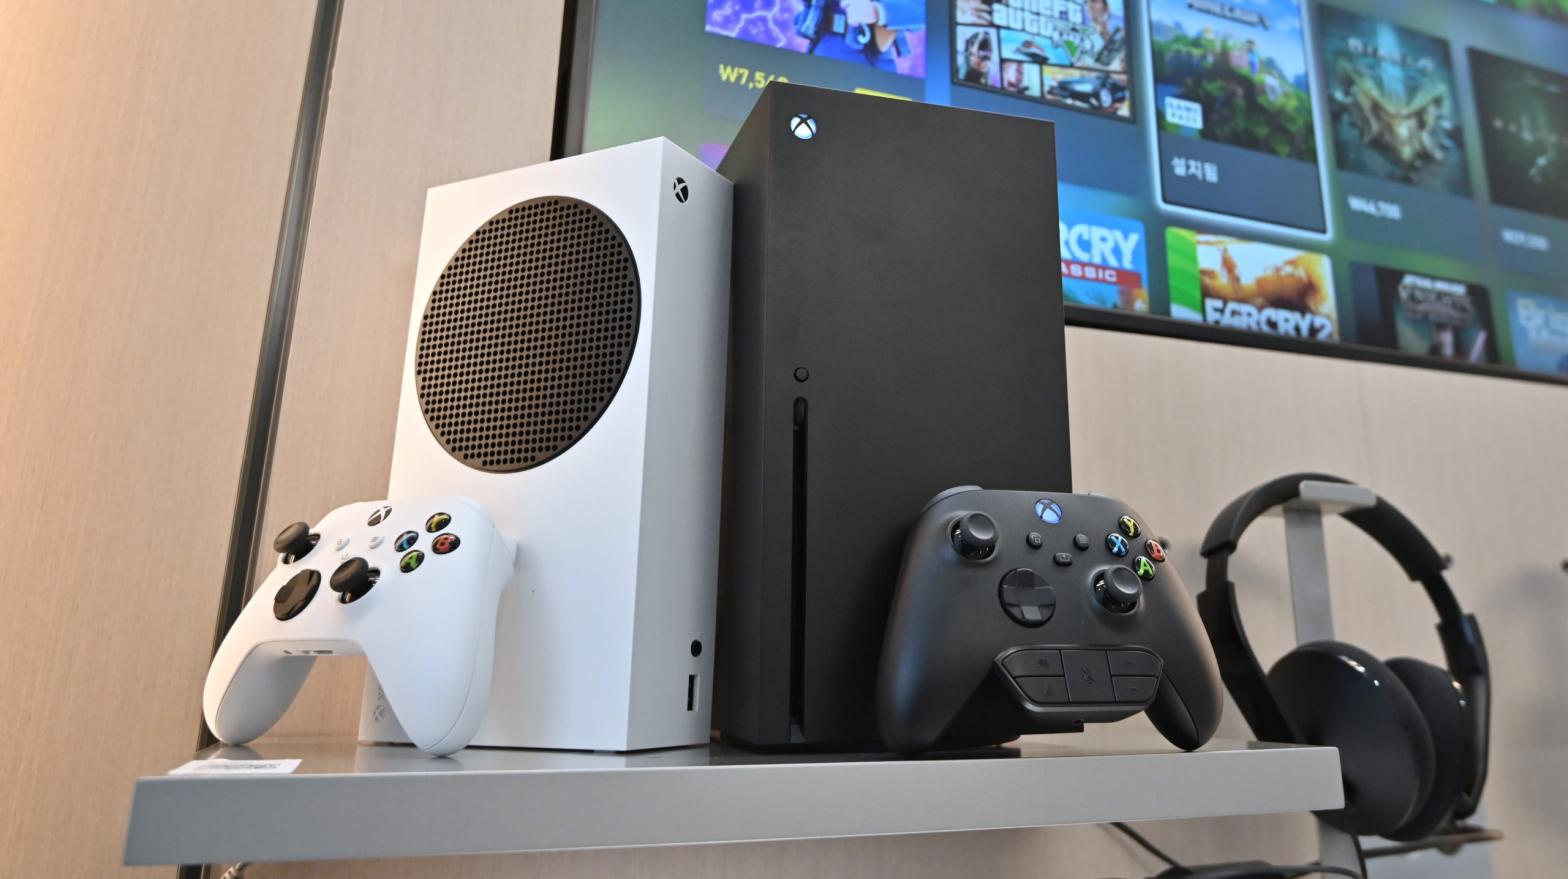 Microsoft's Xbox Series X (black) and series S (white) gaming consoles are displayed at a flagship store of SK Telecom in Seoul on November 10, 2020. (Photo: Jung Yeon-Je, Getty Images)